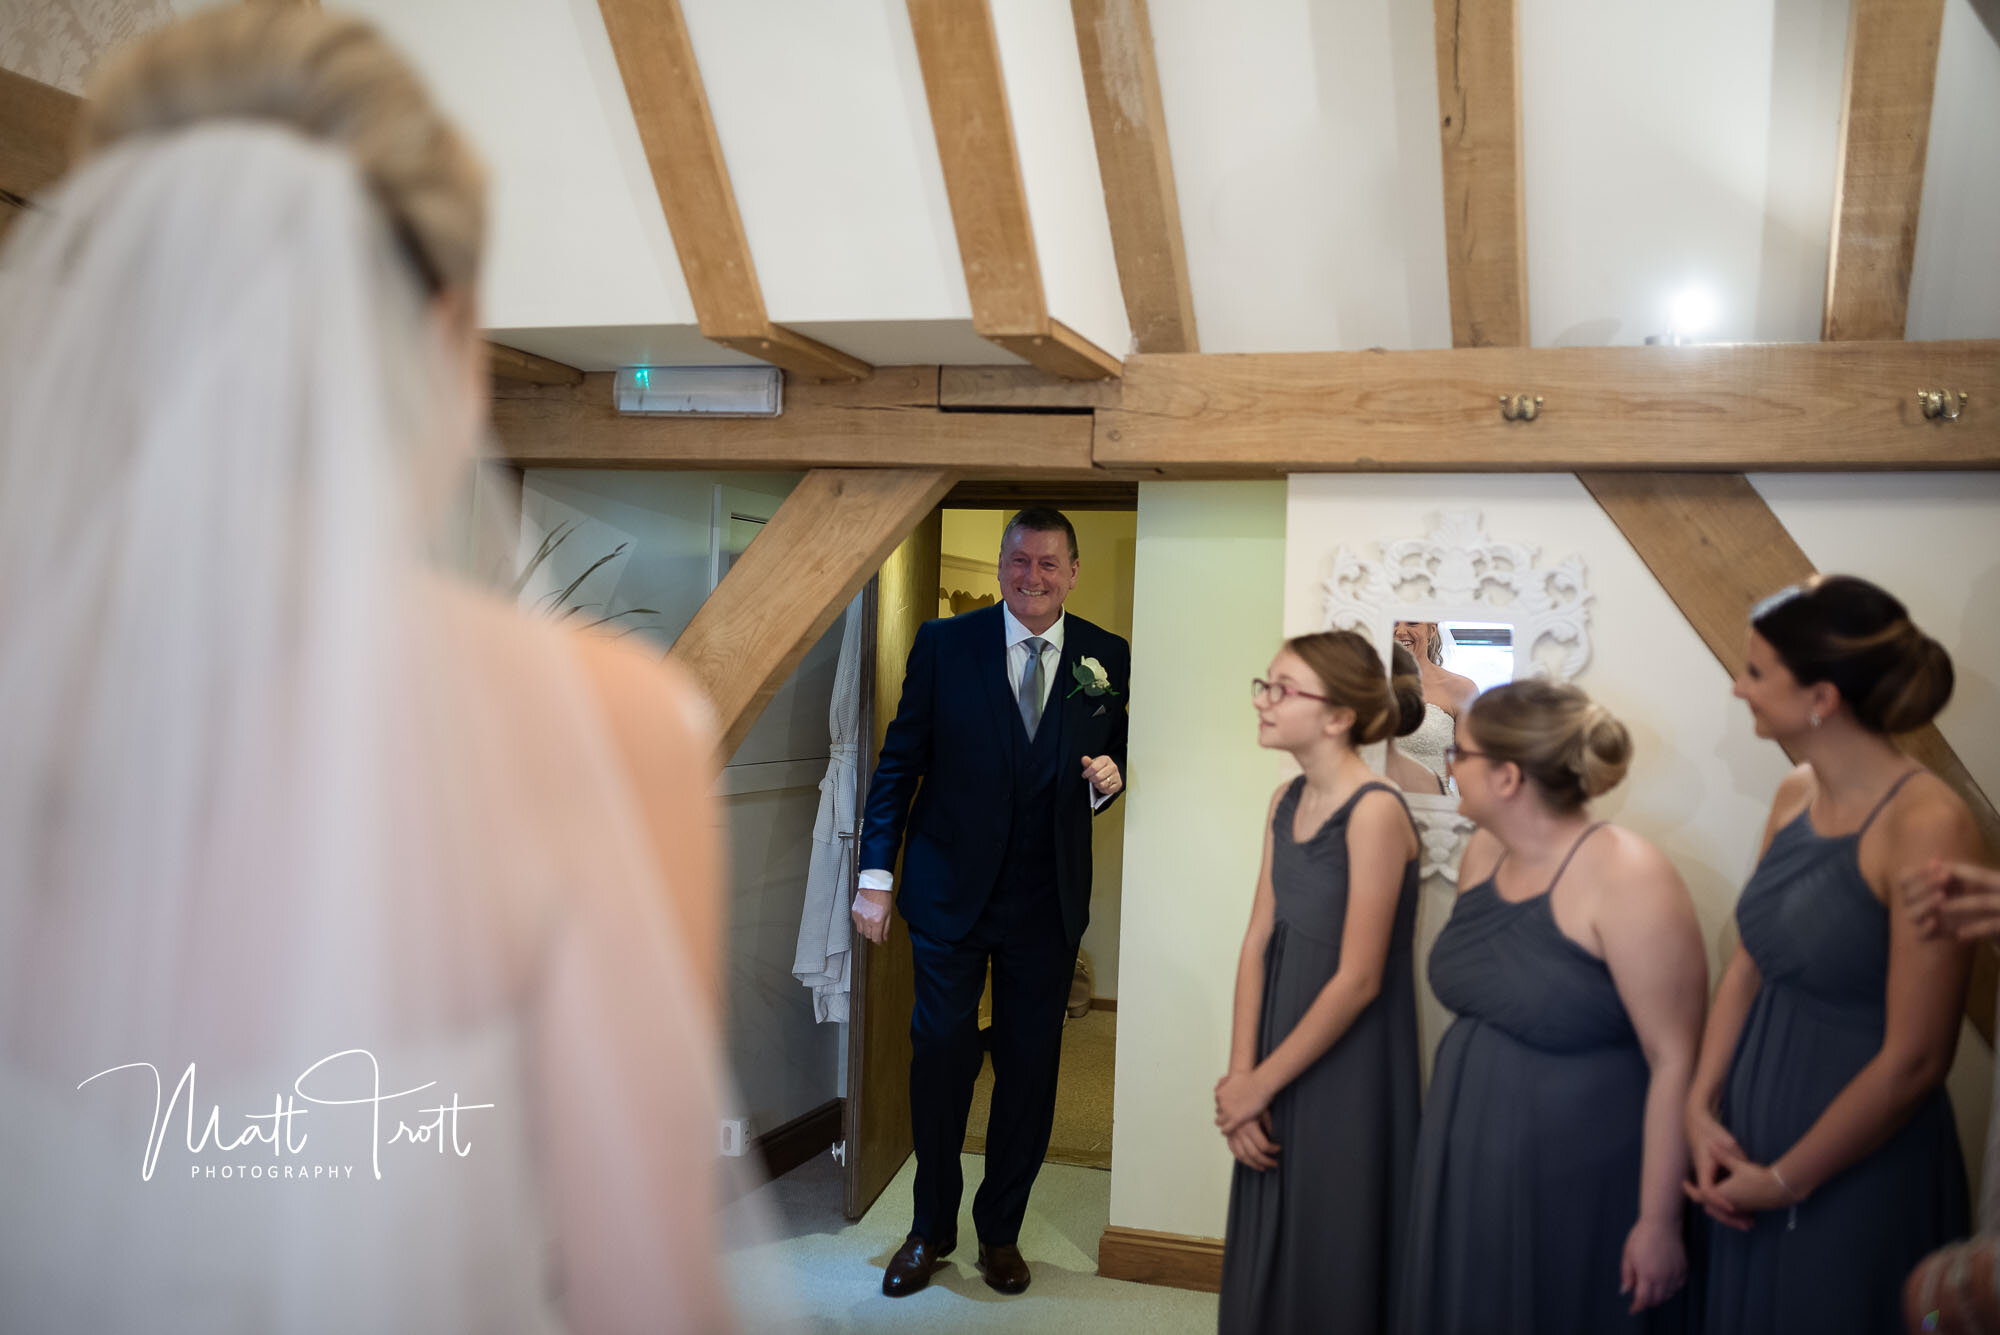 Dad seeing daughter all dressed up in her wedding dress at the Old kent Barn